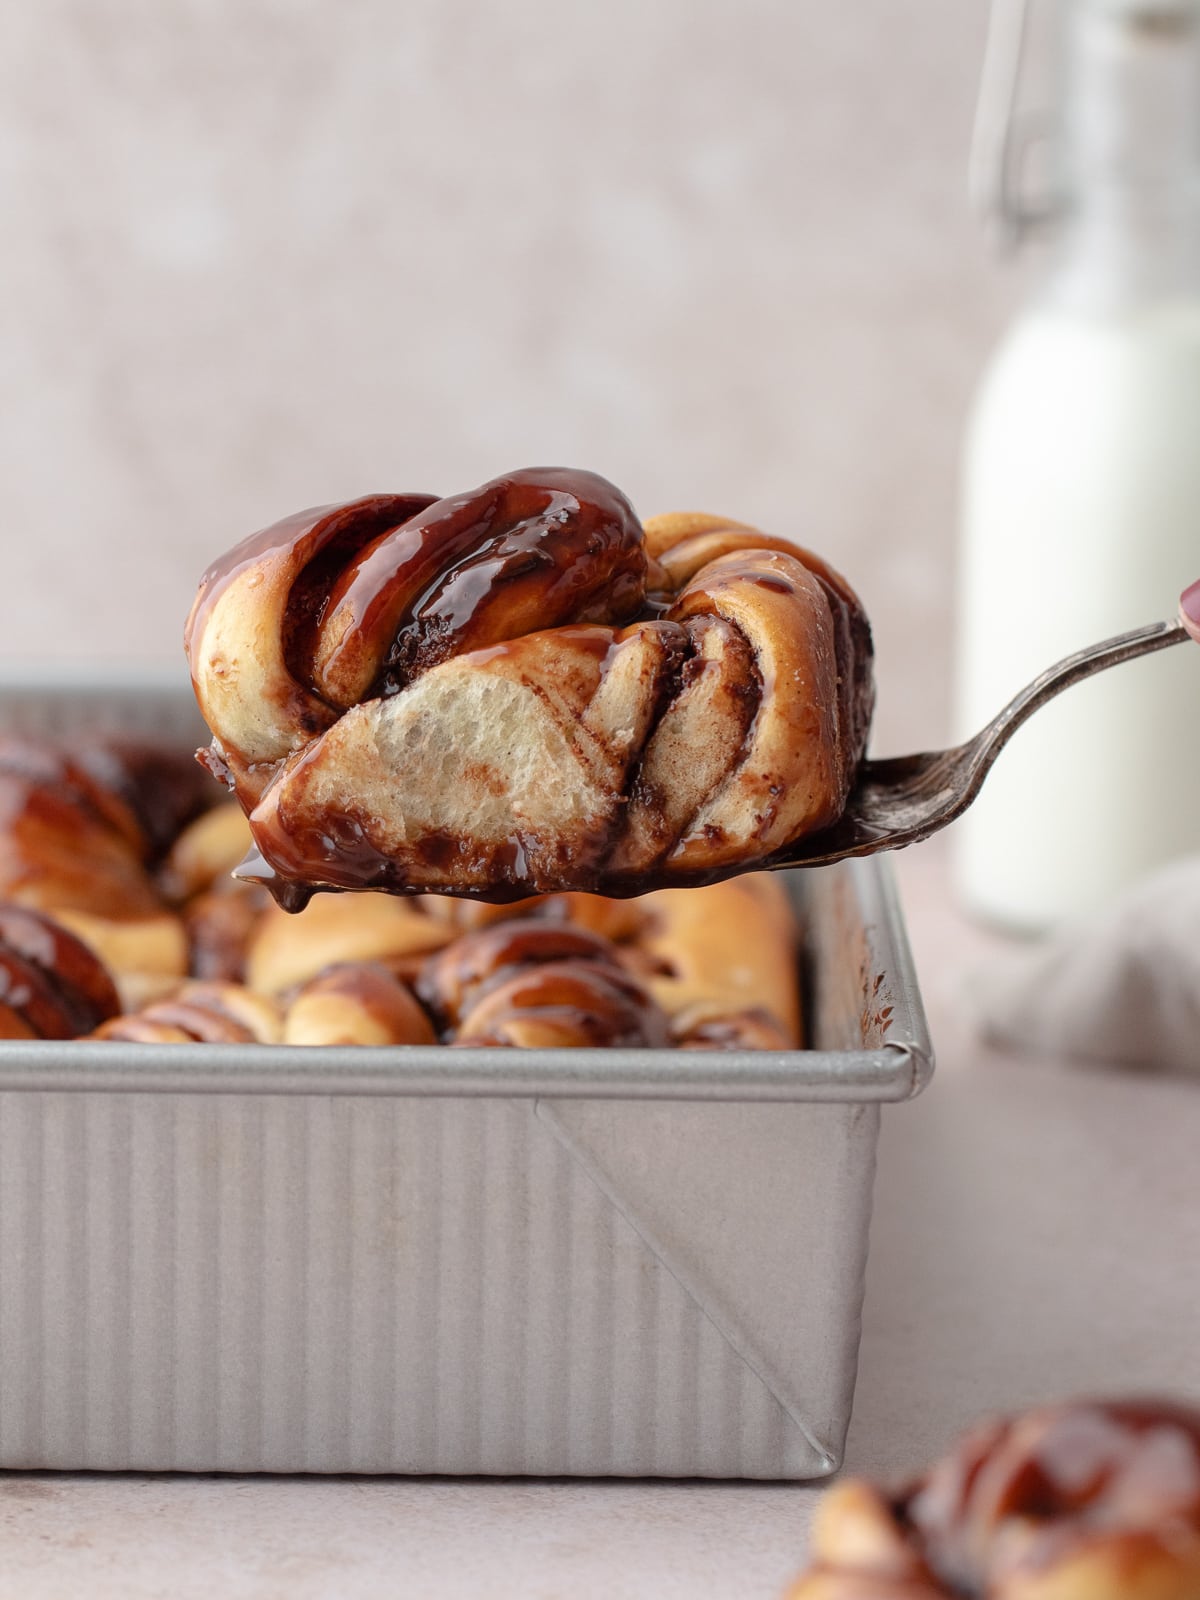 Cake server holding a piece of Nutella knot bun over a tray of buns